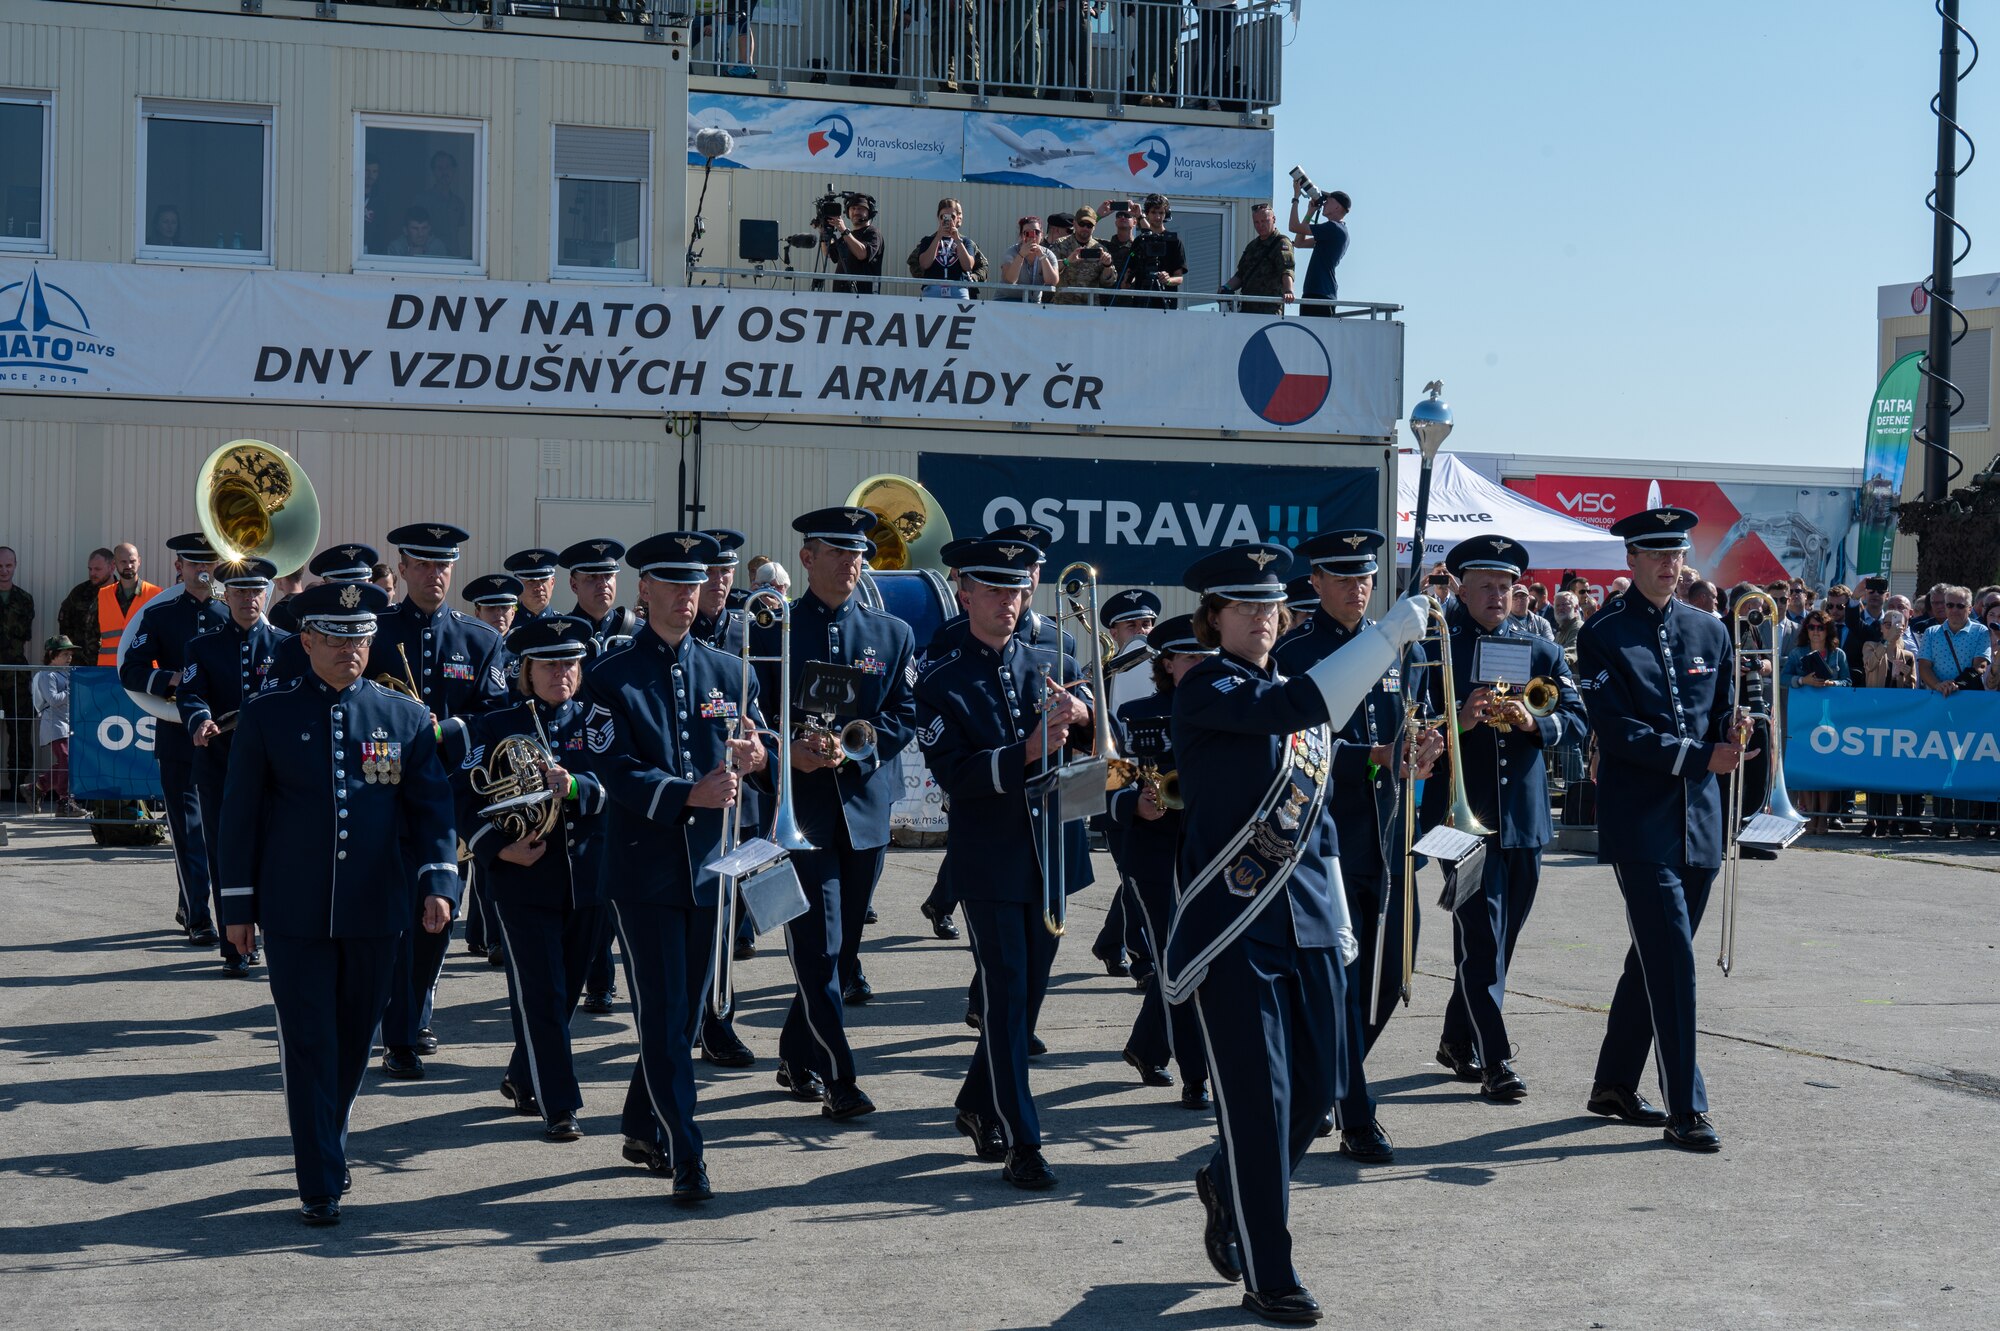 U.S. Air Force Airmen assigned to the U.S. Air Forces in Europe Ceremonial Band, march during the opening ceremony of the NATO Days event at Leoš Janáček Airport in Ostrava, Czech Republic, Sept. 16, 2023.